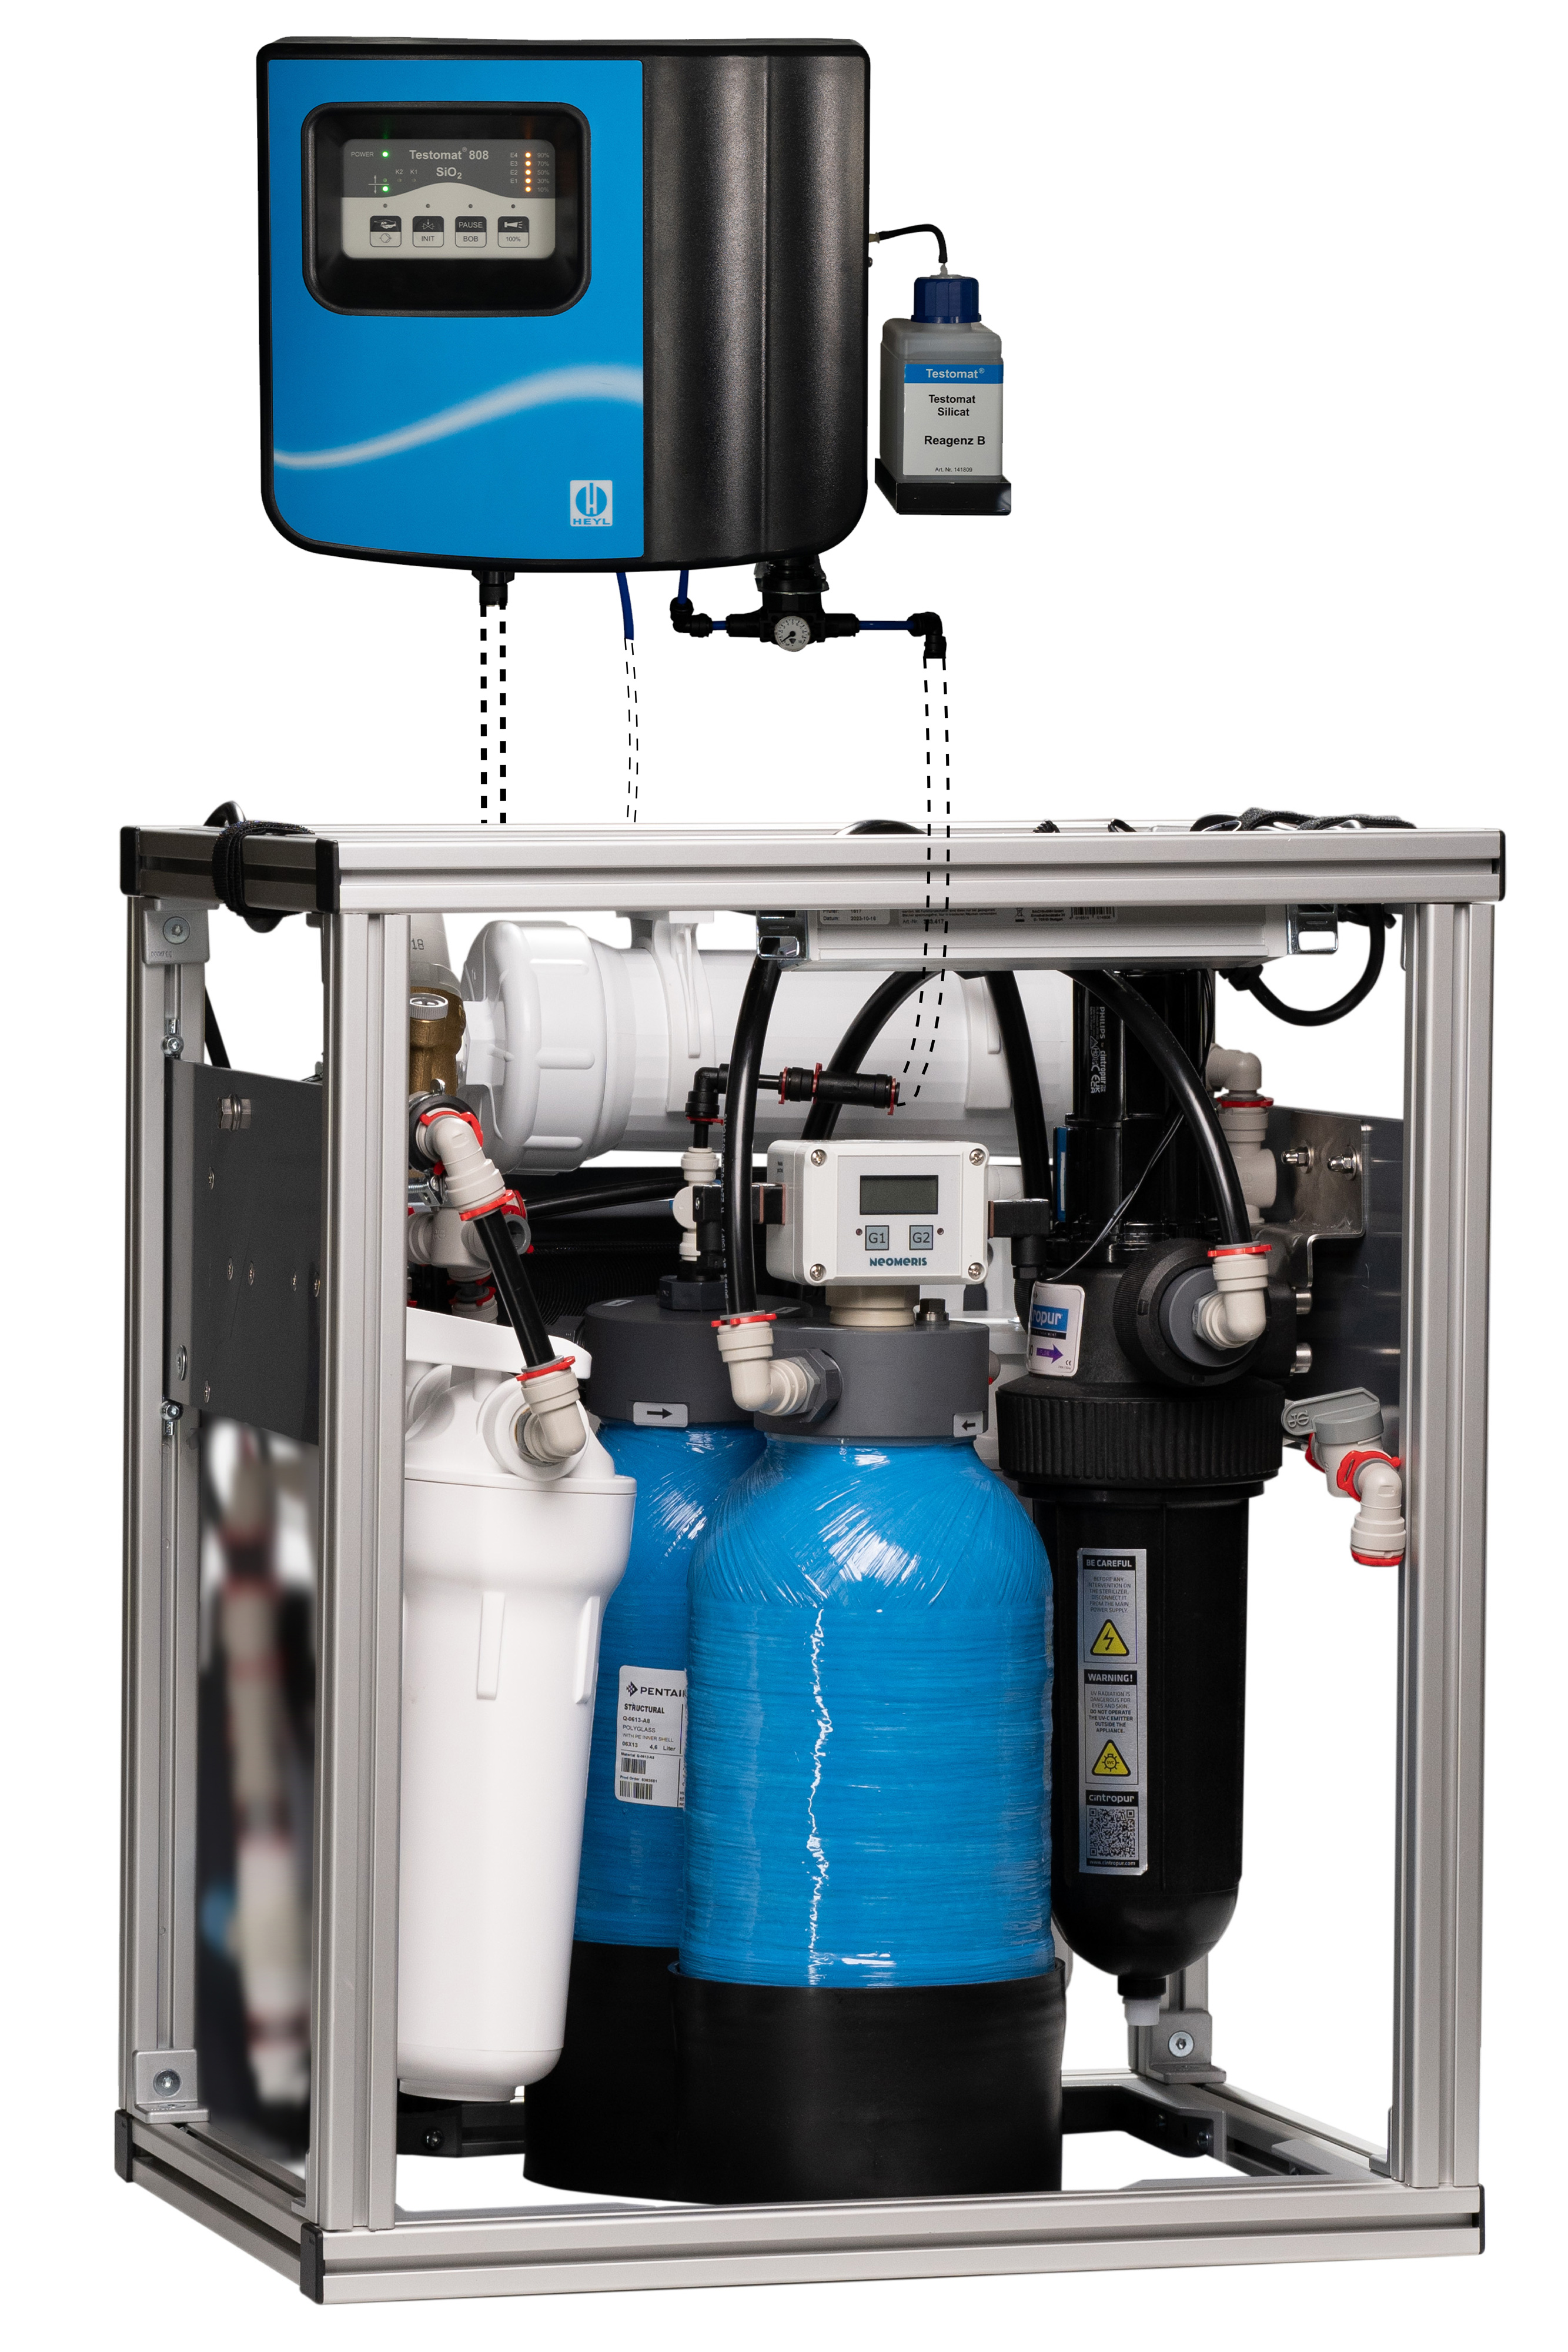 Water treatment system as an under-counter system for outpatient clinics, incl. UV system and pyrogen filter